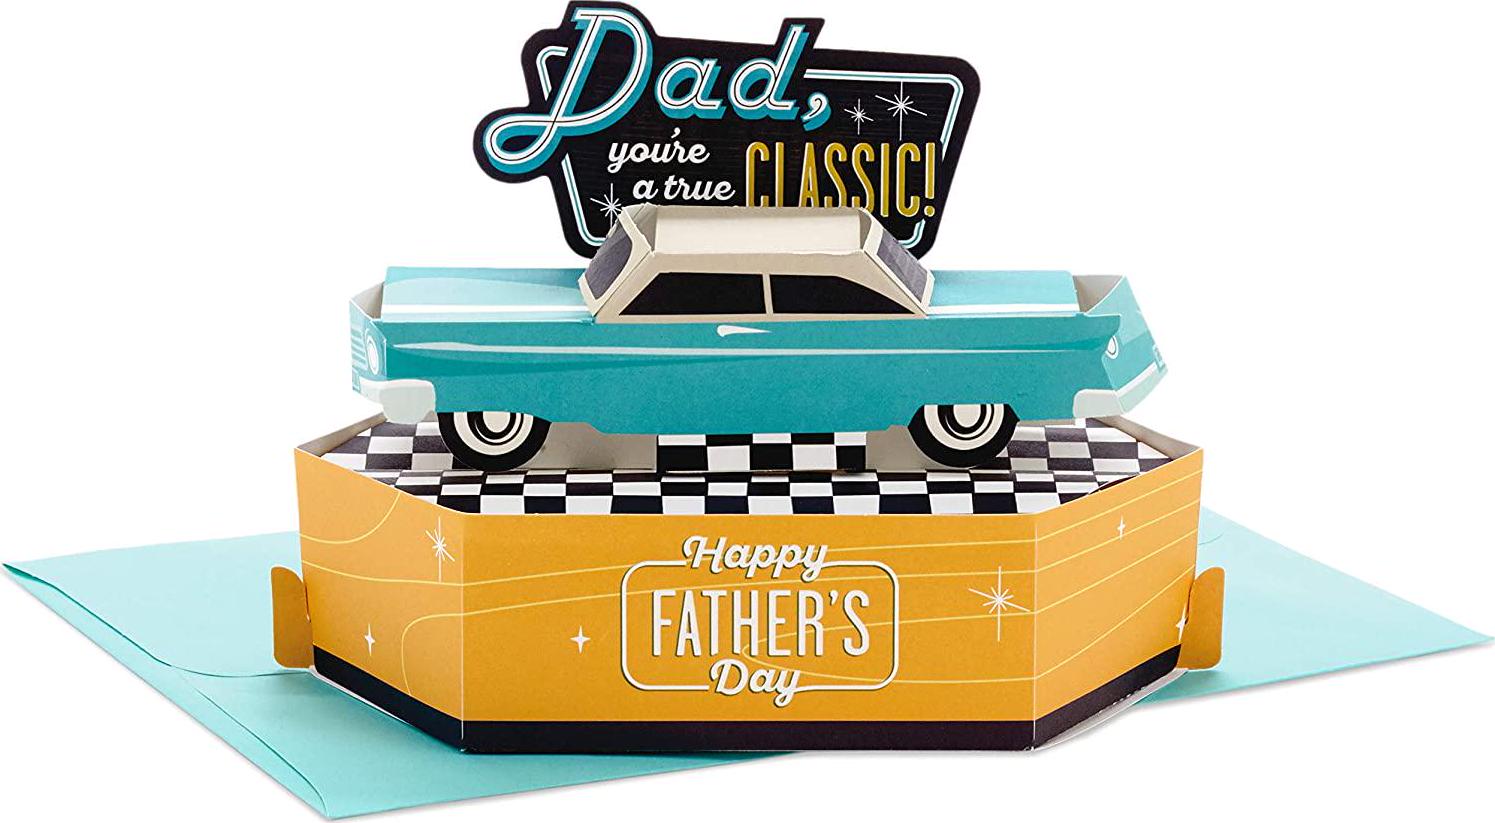 Hallmark, Hallmark Classic Car Paper Wonder Displayable Pop Up Father's Day Greeting Card for Dad